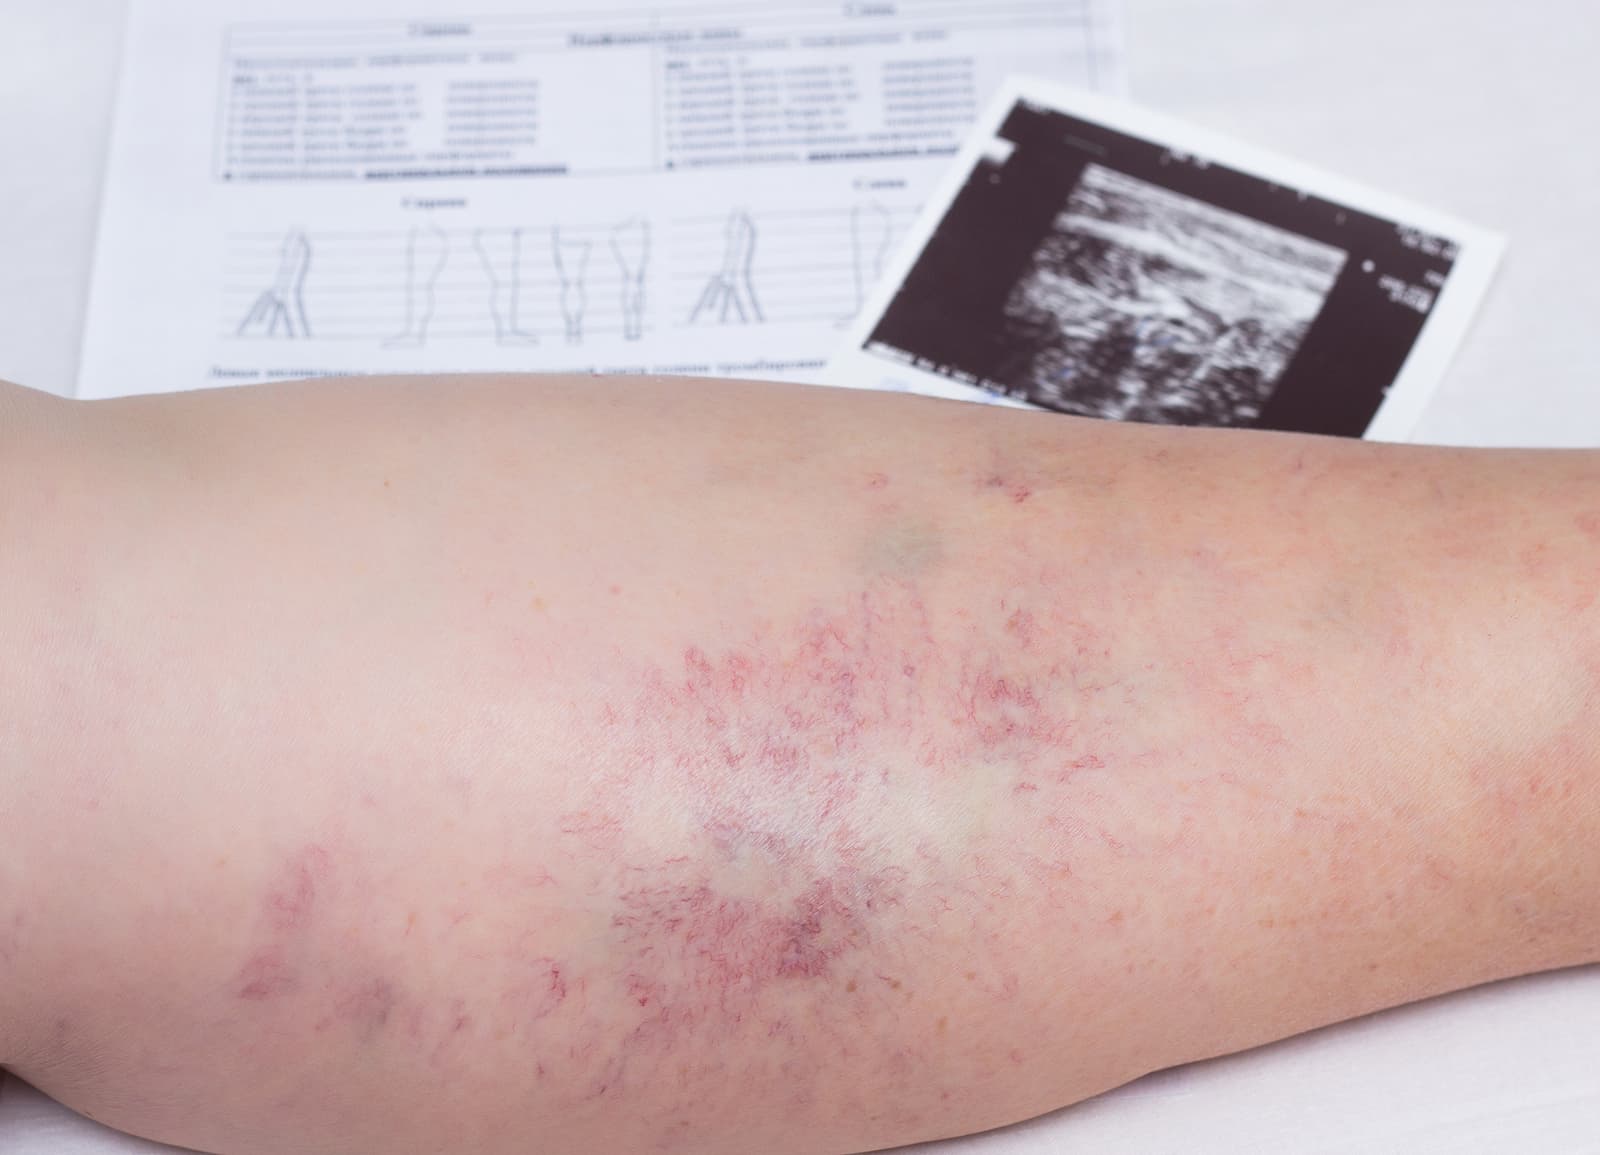 Close up image of patients leg having varicose veins with ultrasound examination documents